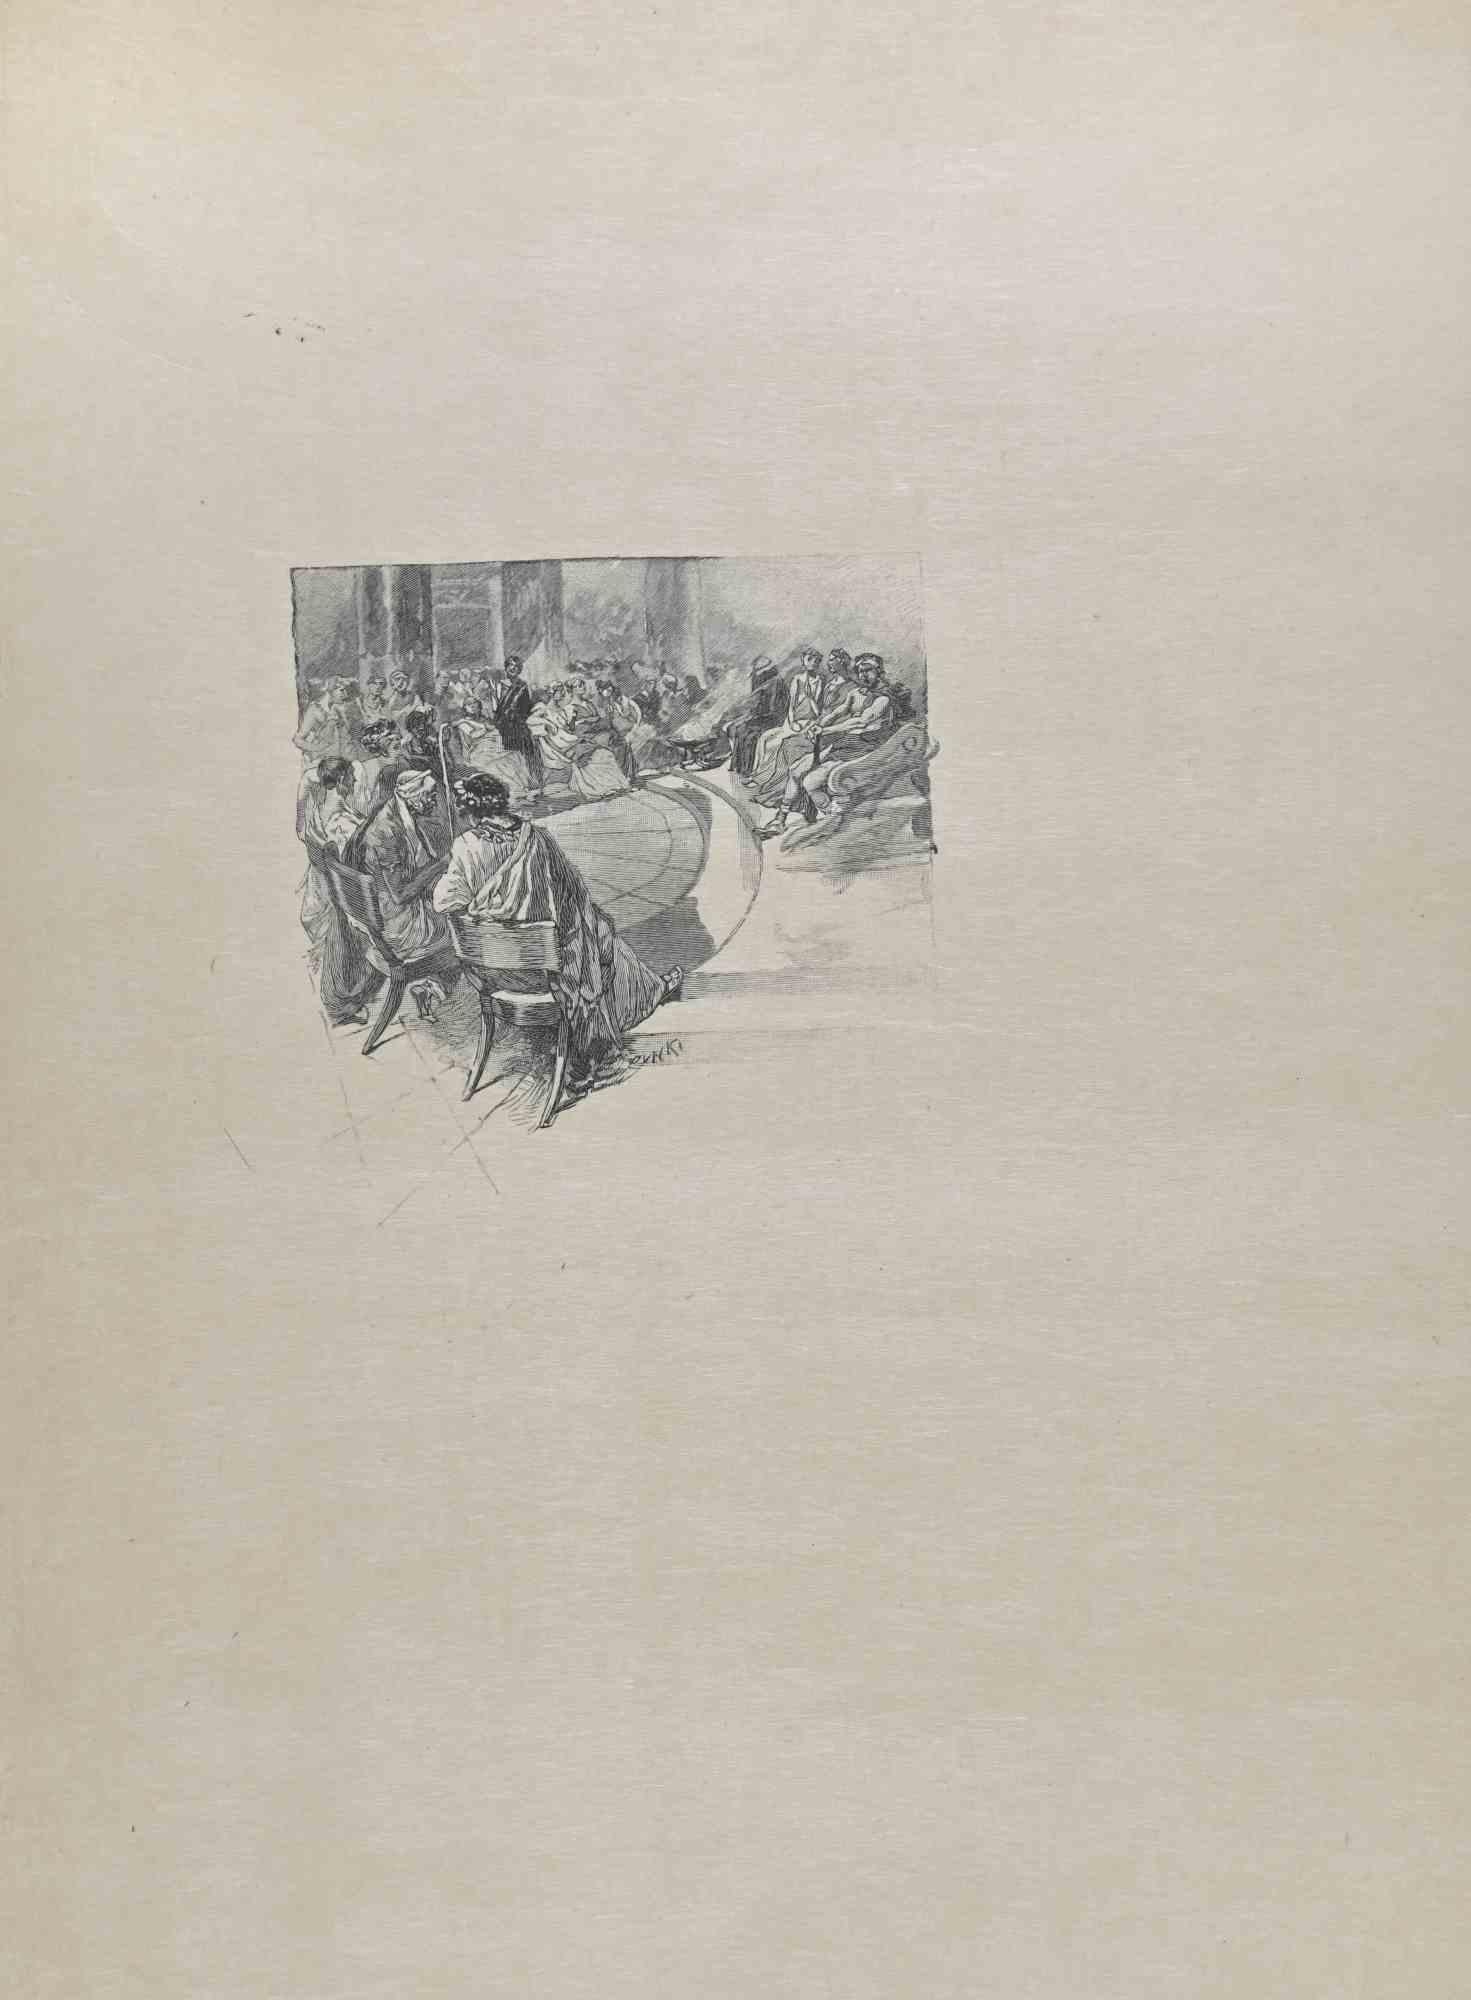 Petits Contes à ma Sœur  is a Lithograph on paper realized by Hégésippe Moreau,  dated 1838.

The artwork  is in good condition . 

Hégésippe Moreau (1810-1838) was a French lyric poet. The romantic myth was solidified by the publication of his